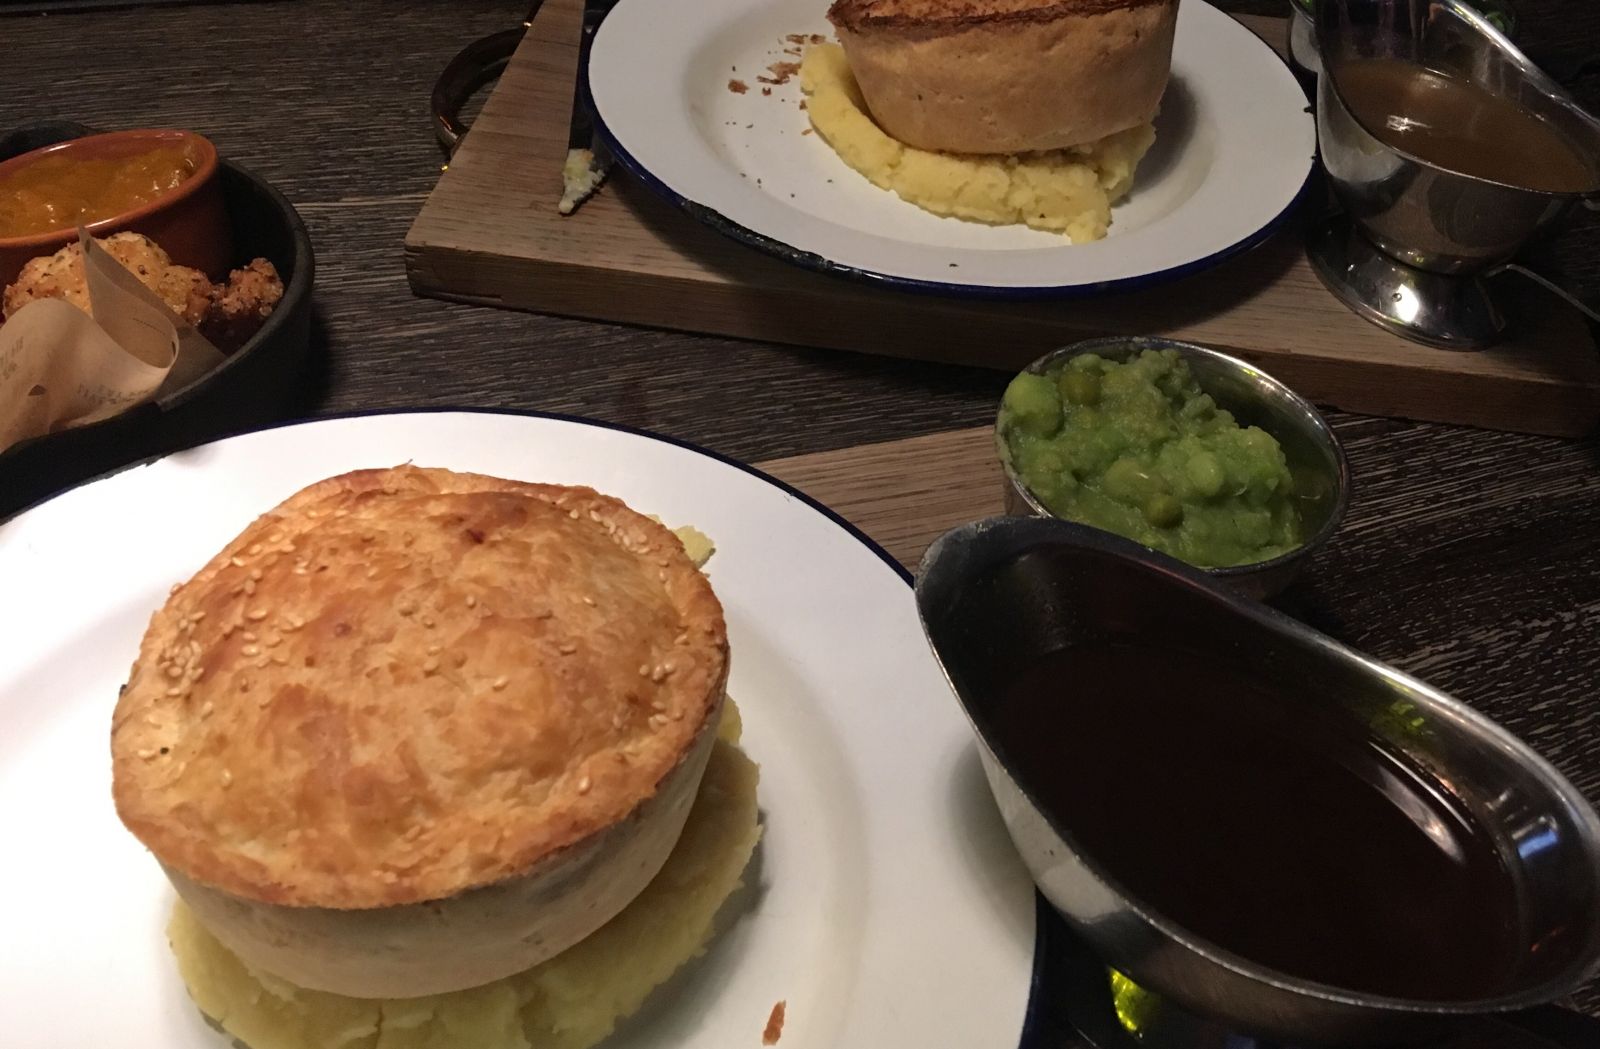 A pie and two sides will set you back just £8.50 during Pieminister's lunch offer period.